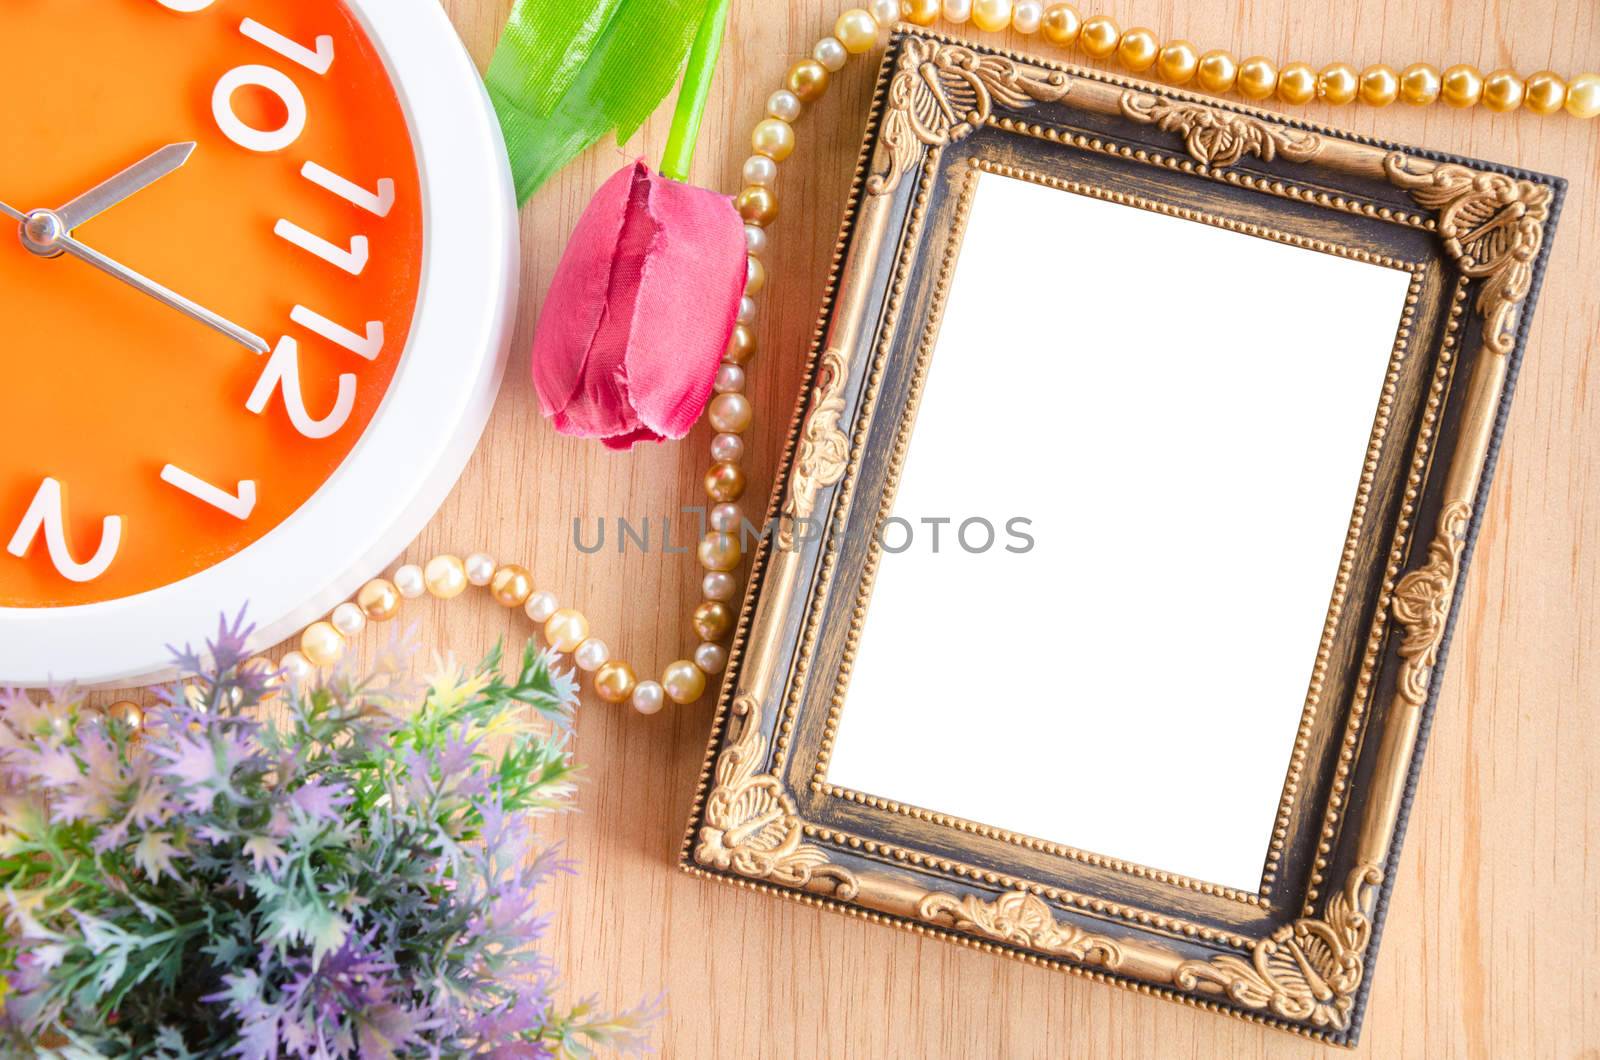 Vintage blank photo frame and clock with flower on wooden backgr by Gamjai